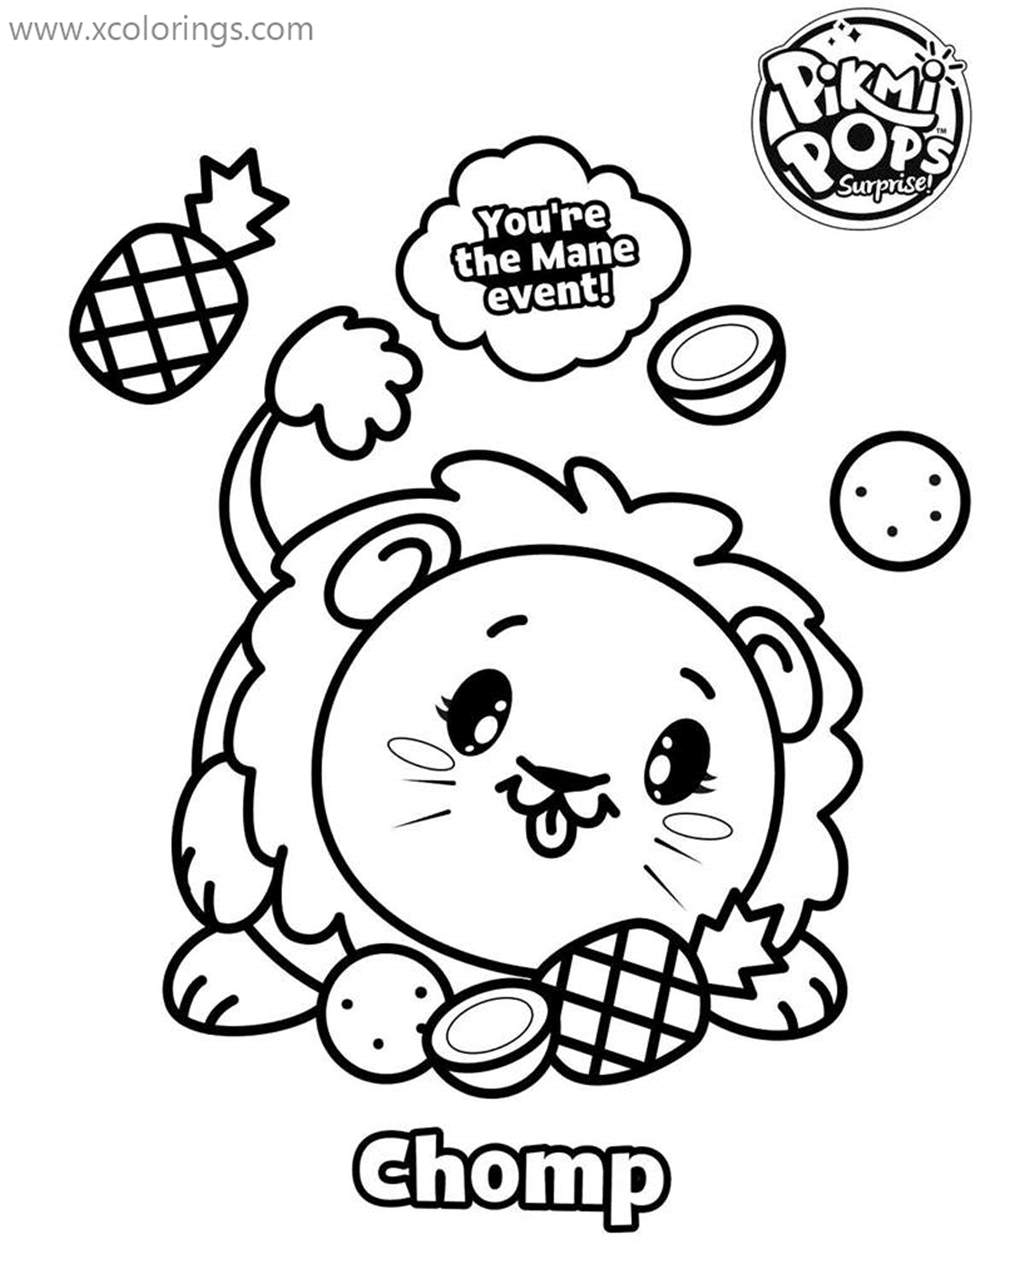 Free Chomp from Pikmi Pops Coloring Pages printable